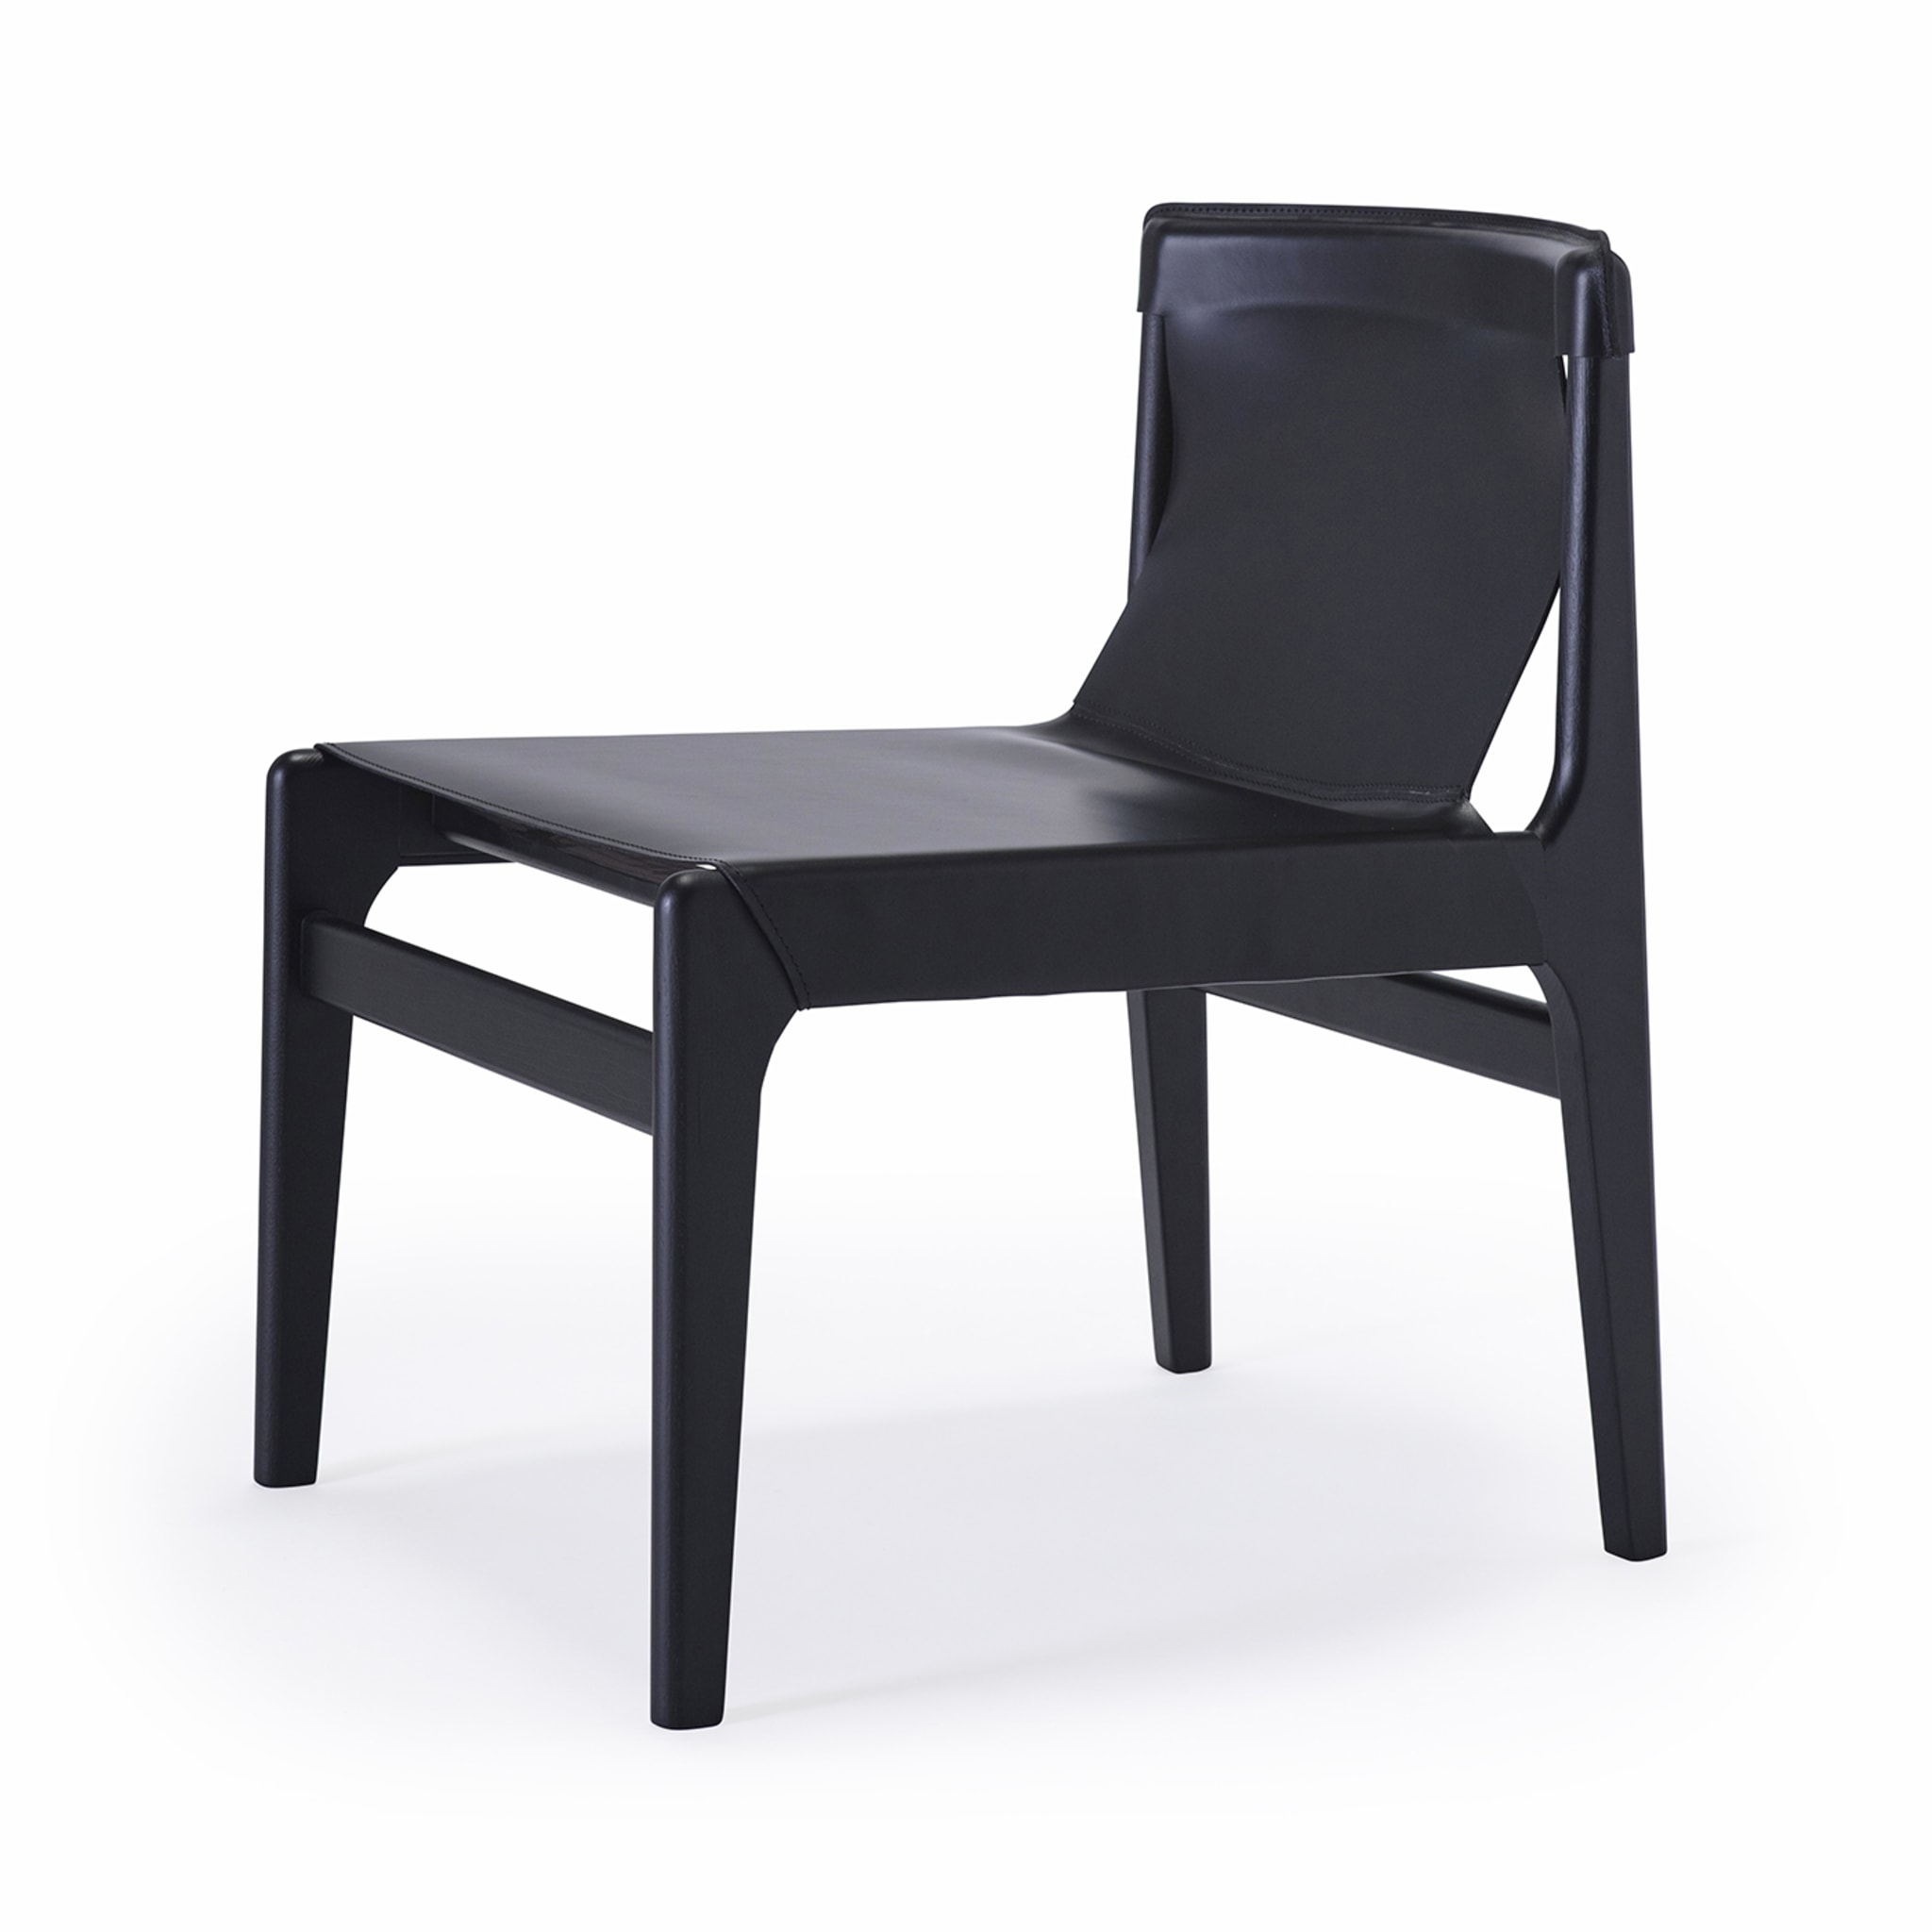 Burano Black Leather Lounge Chair by Balutto Associati - Alternative view 3